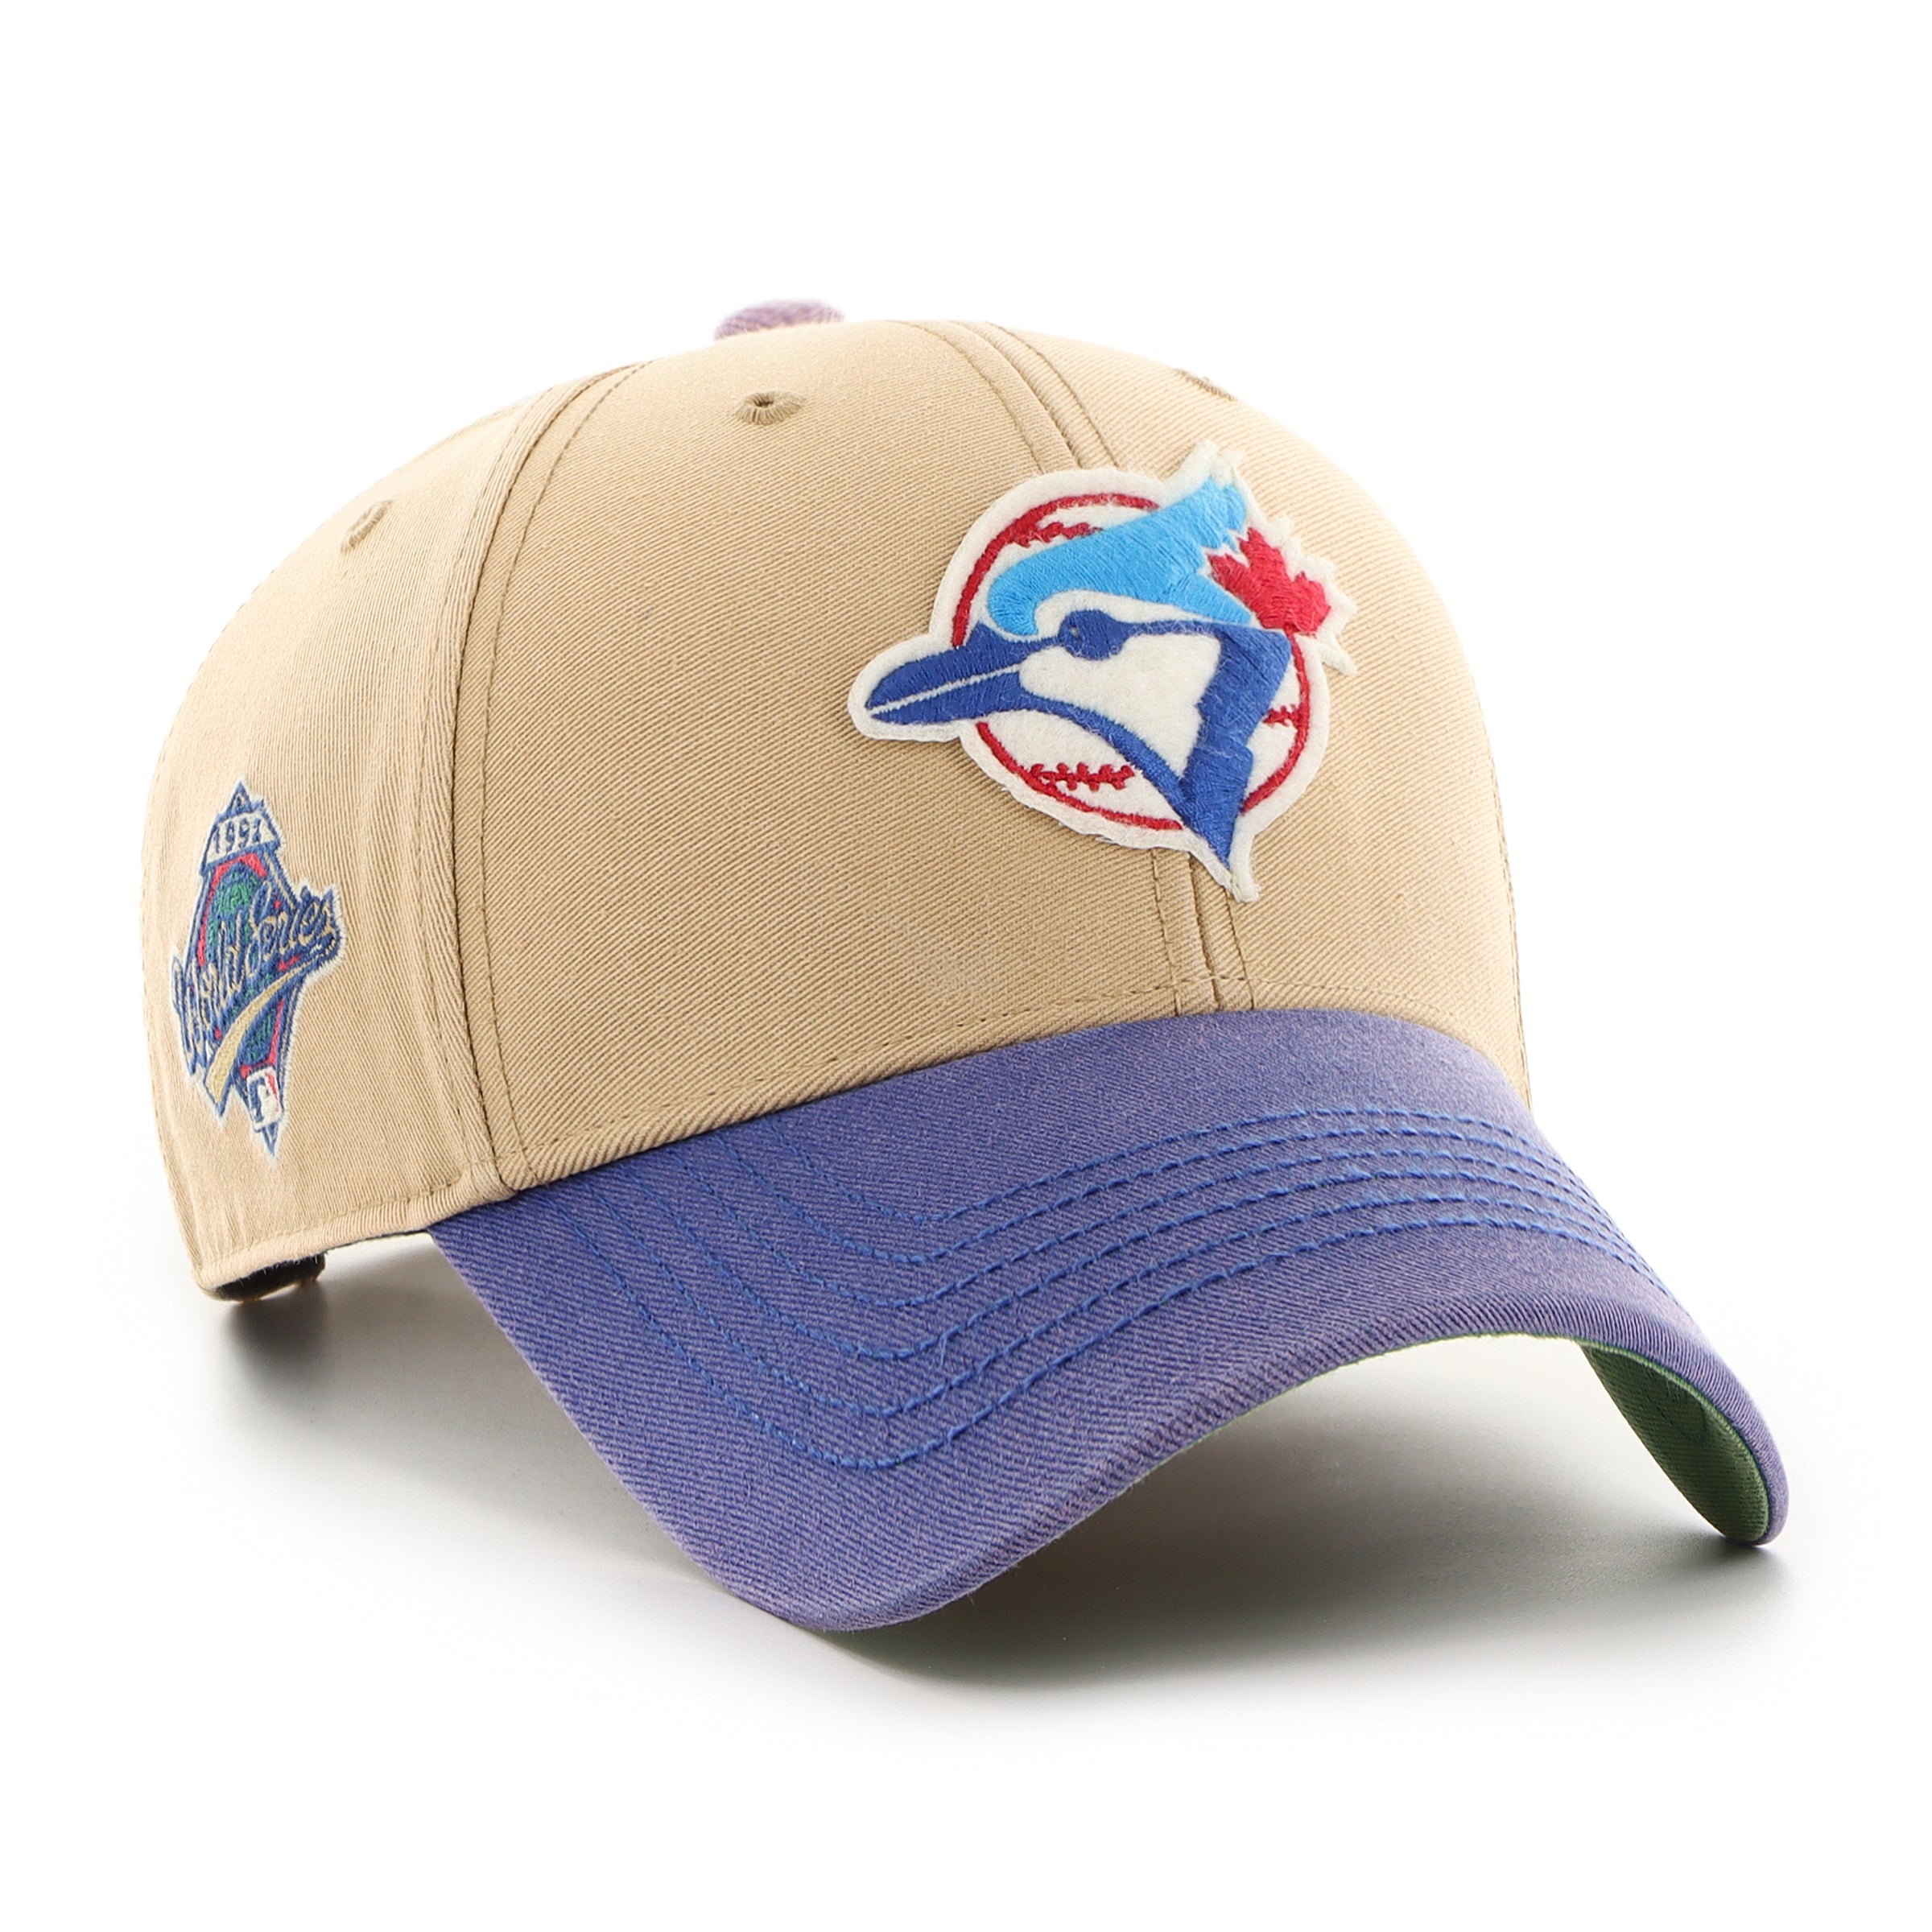 Montreal Expos Cooperstown MVP Tri-Color Cap - Size One-Size